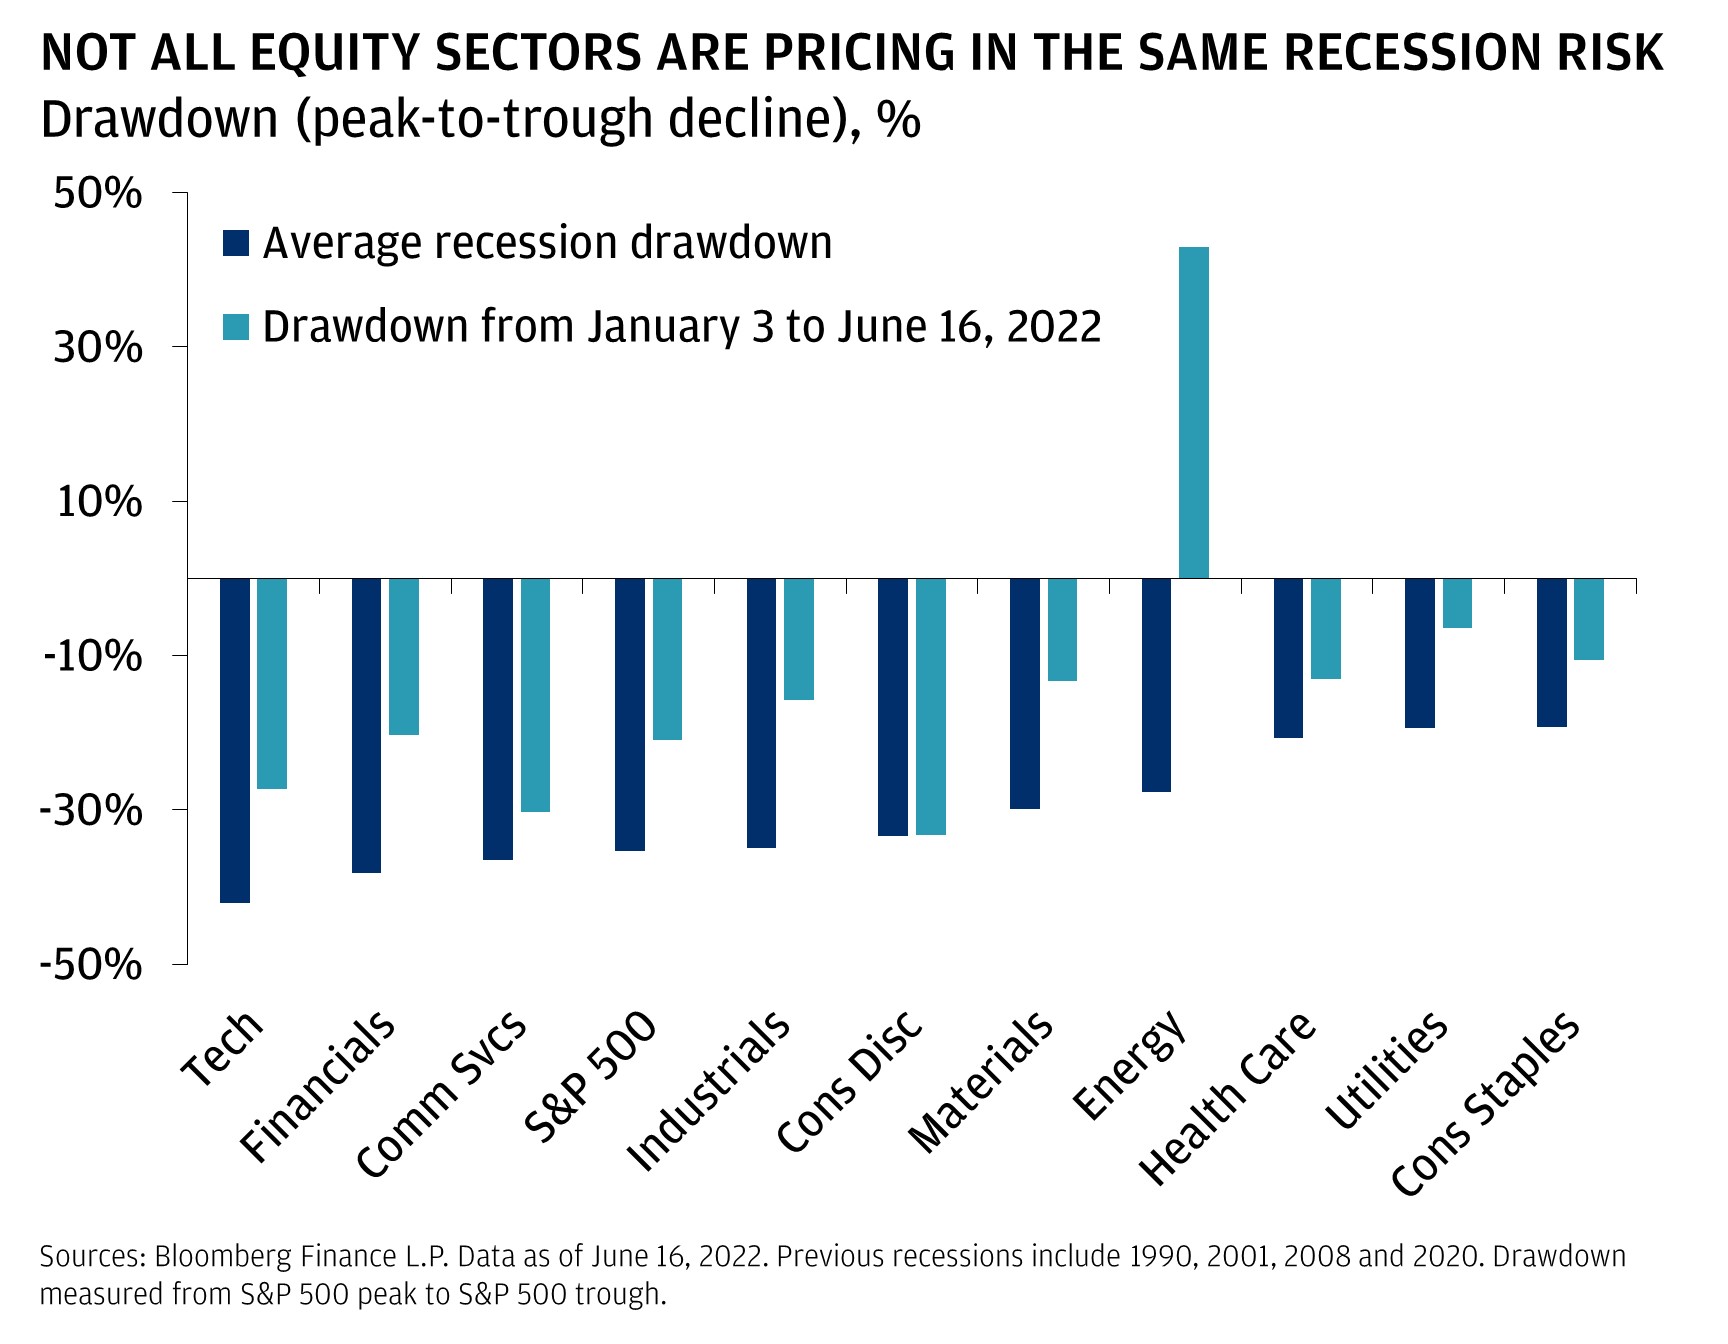 This chart shows the average recession drawdown (including 1990, 2001, 2008 and 2020) for the S&P 500 and the subsequent sectors, as well as the current drawdown for each from January 3 (peak) to June 16.